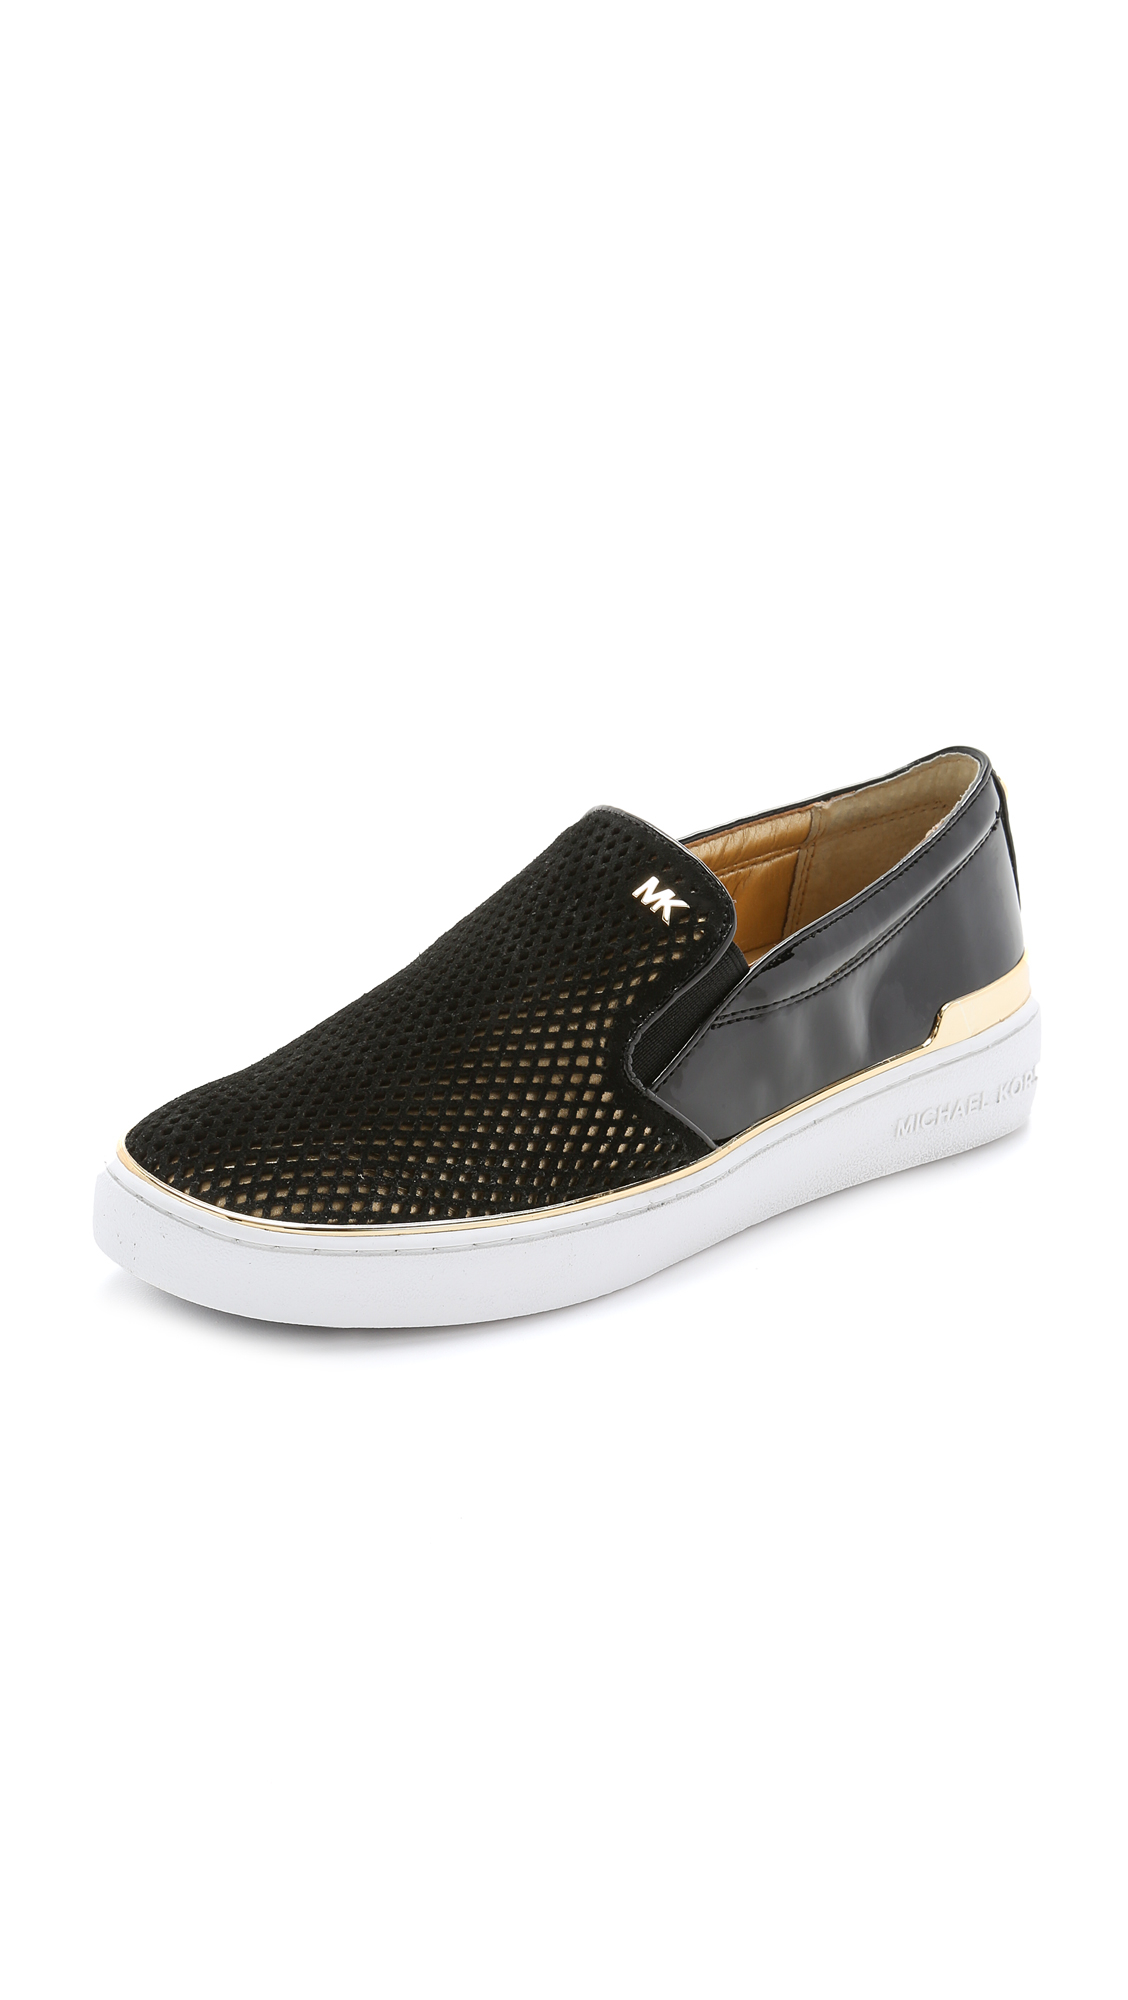 black and gold slip on sneakers